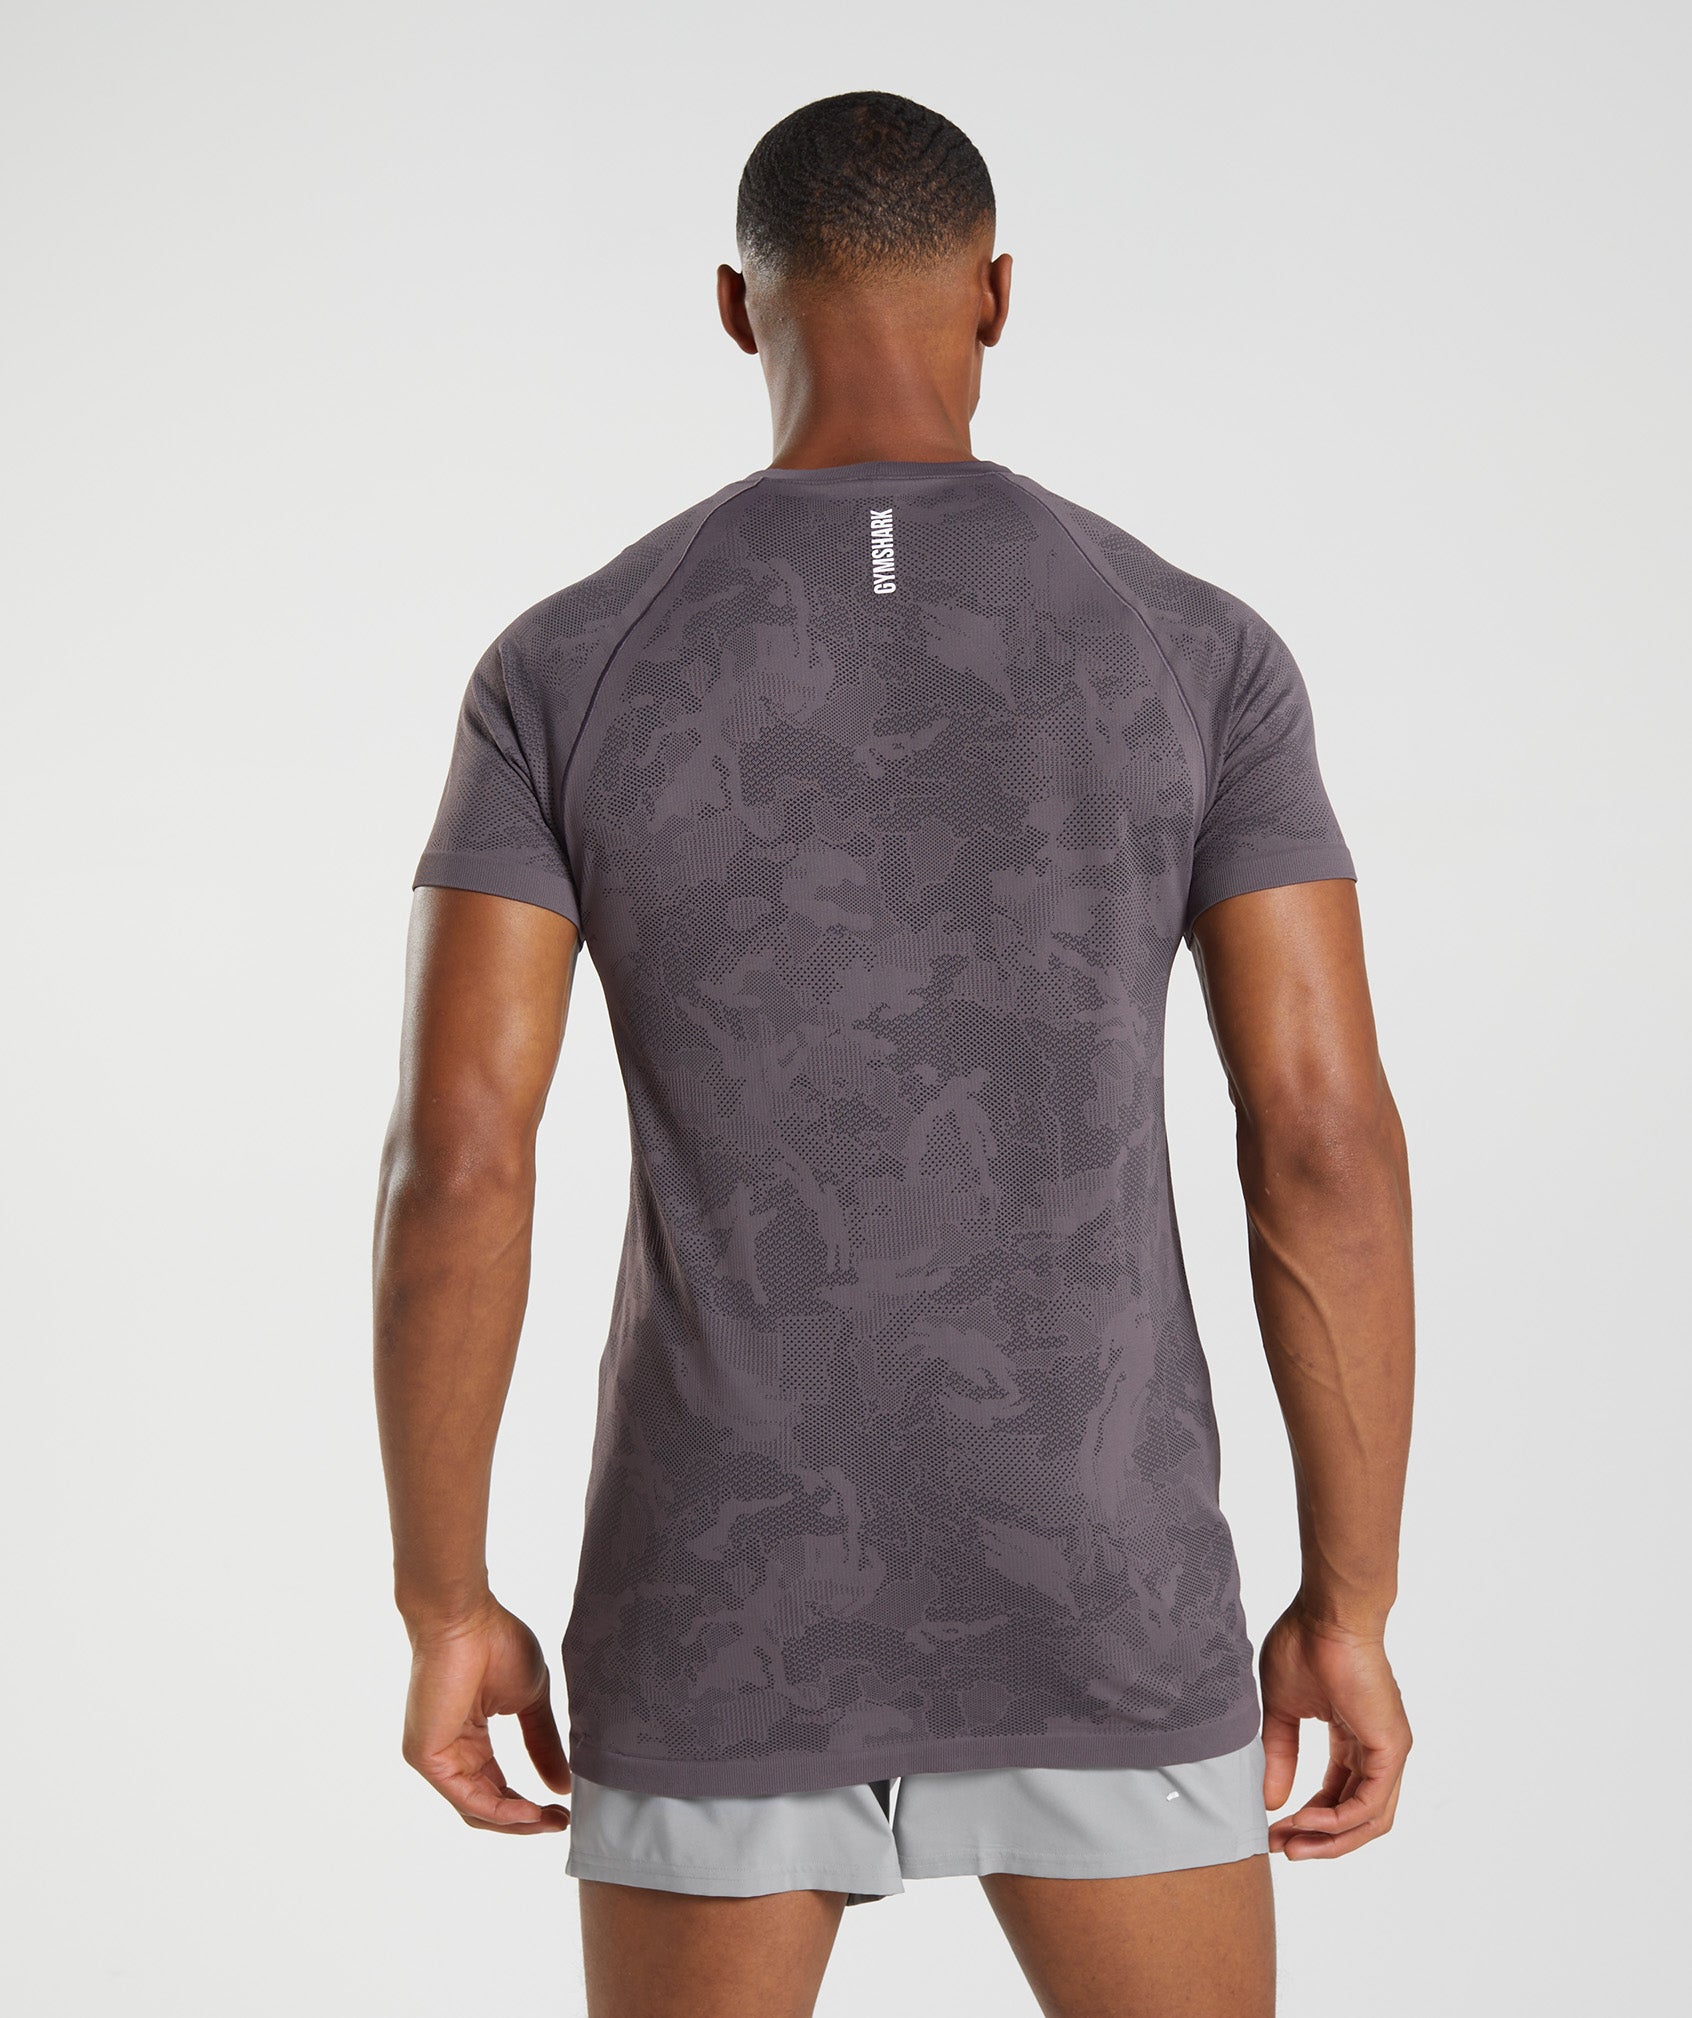 Geo Seamless T-Shirt in Musk Lilac/Black - view 2